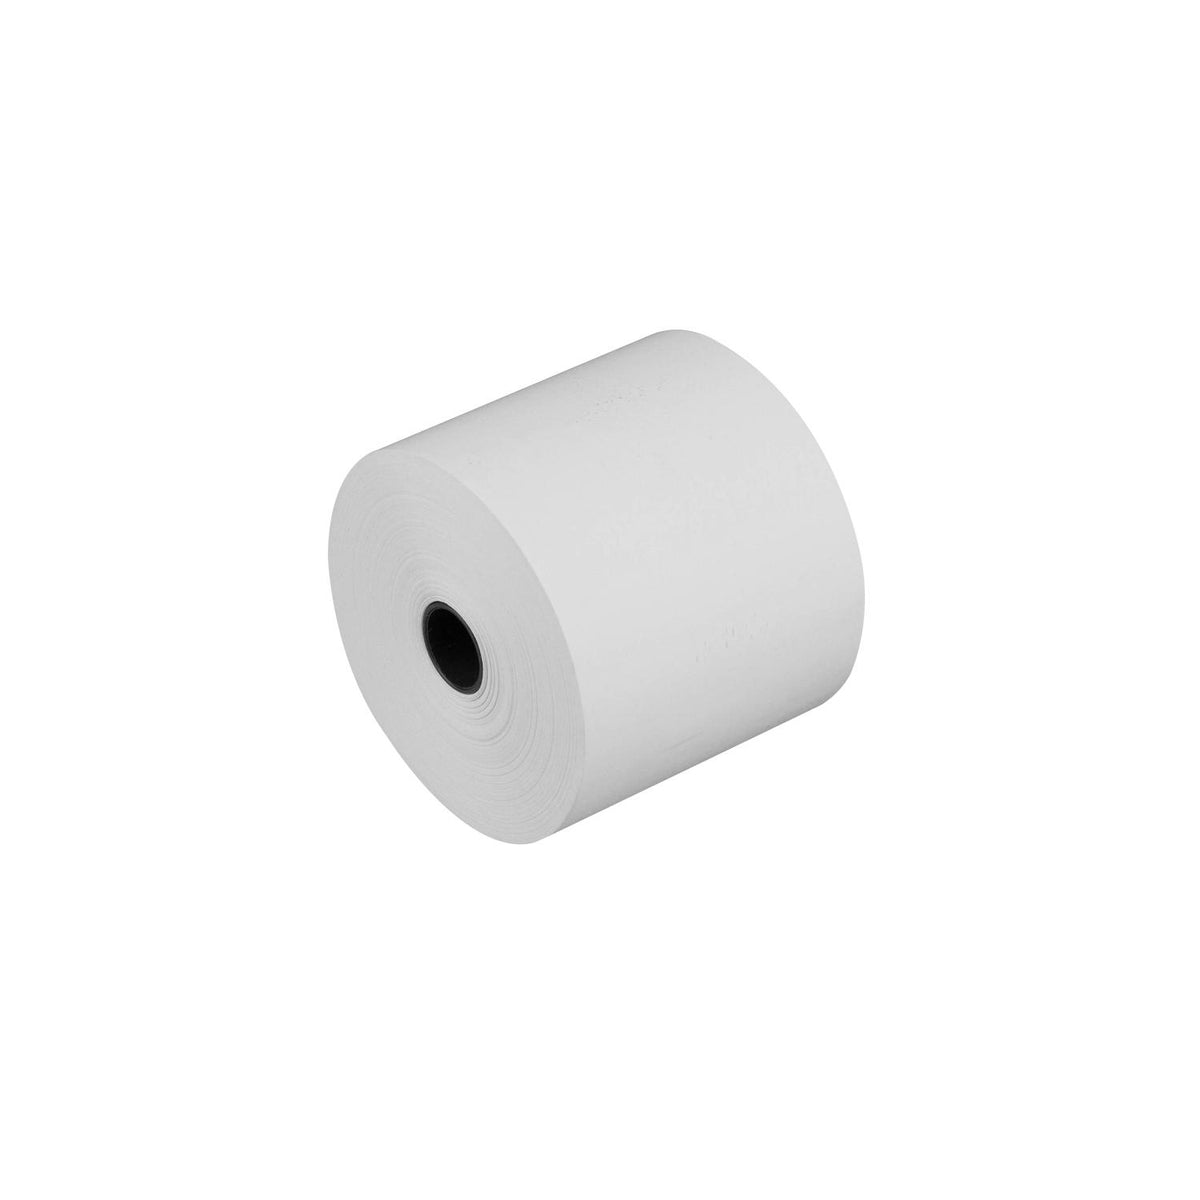 Restaurant Supplies, Paper Products